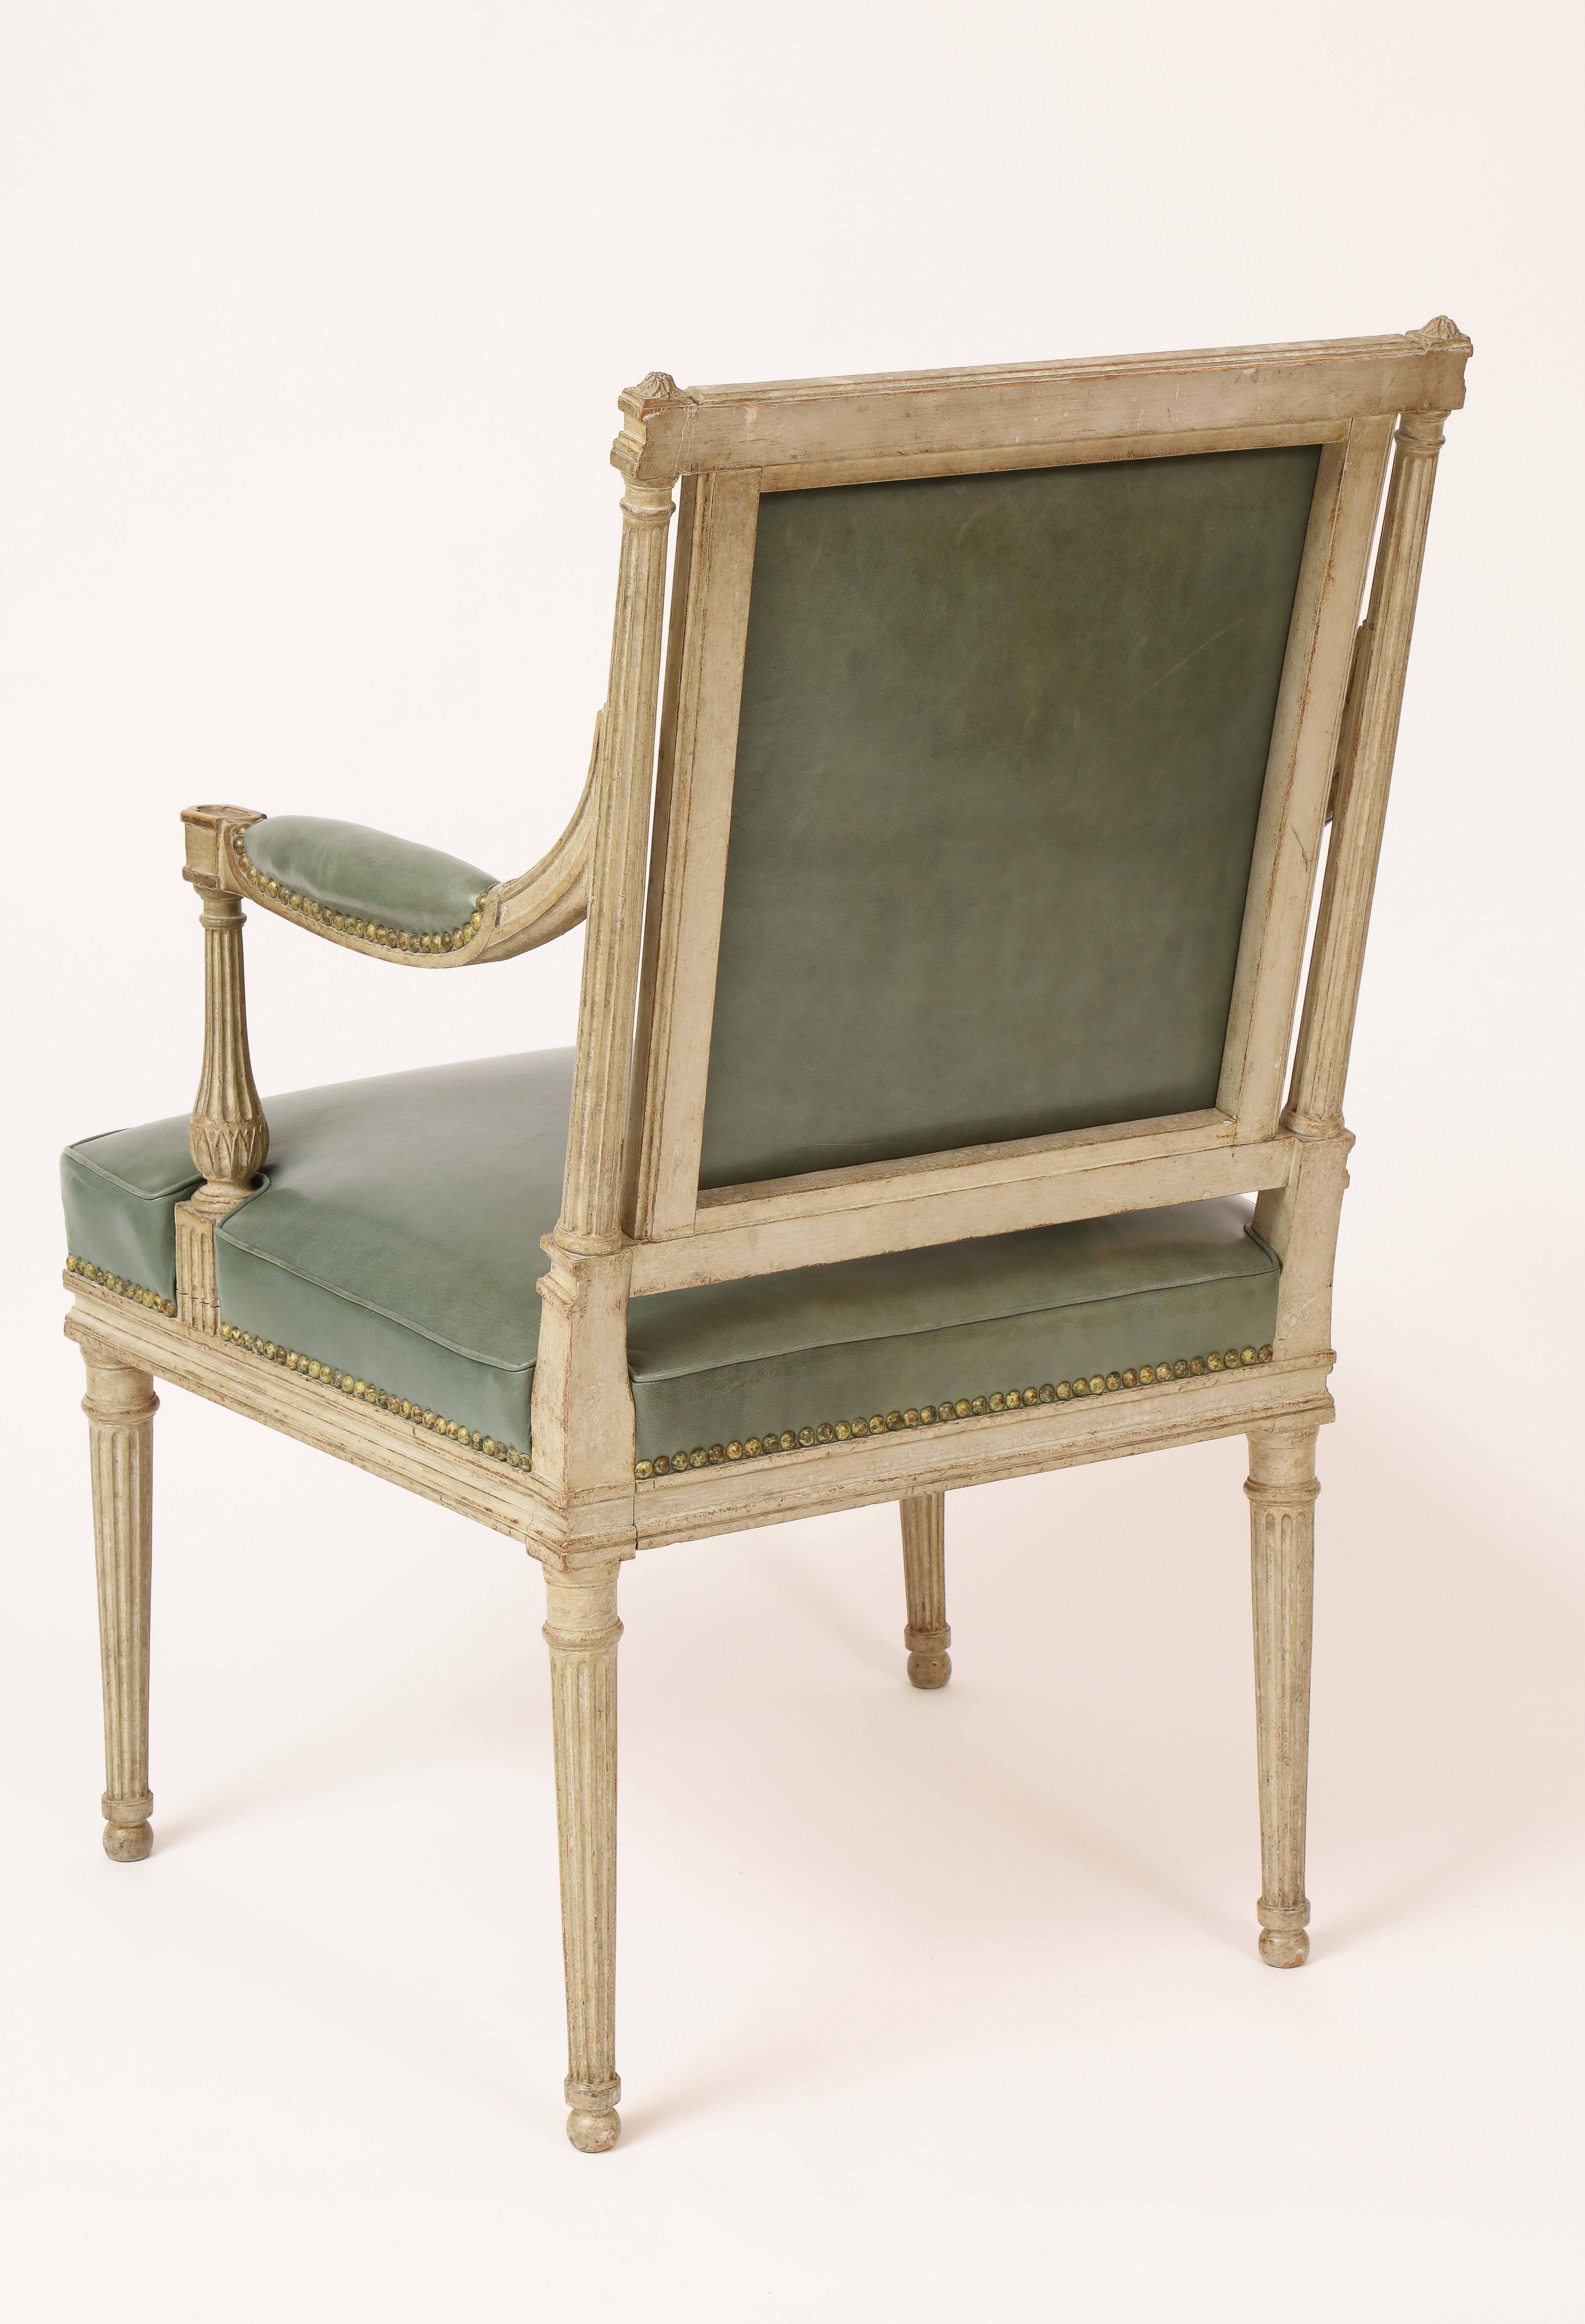 Pair of French Neoclassical Armchairs in the Louis XVI Taste by Madison Jansen 1